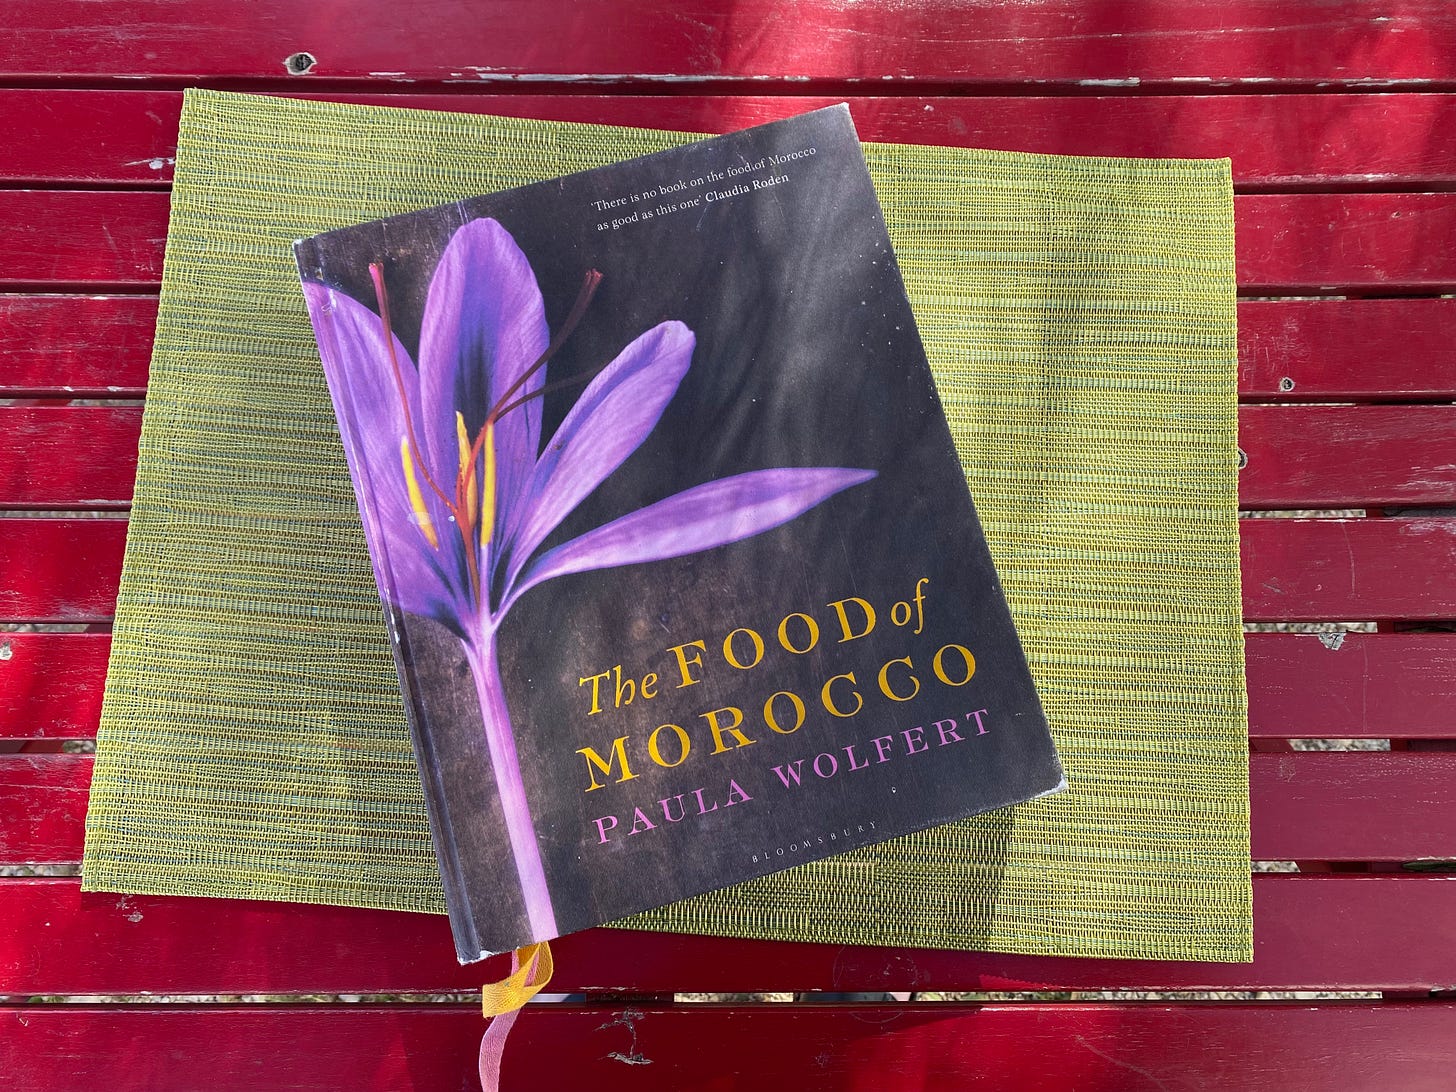 Picture of the cook book - The Food of Morocco - Paula Wolfert on an outside table.